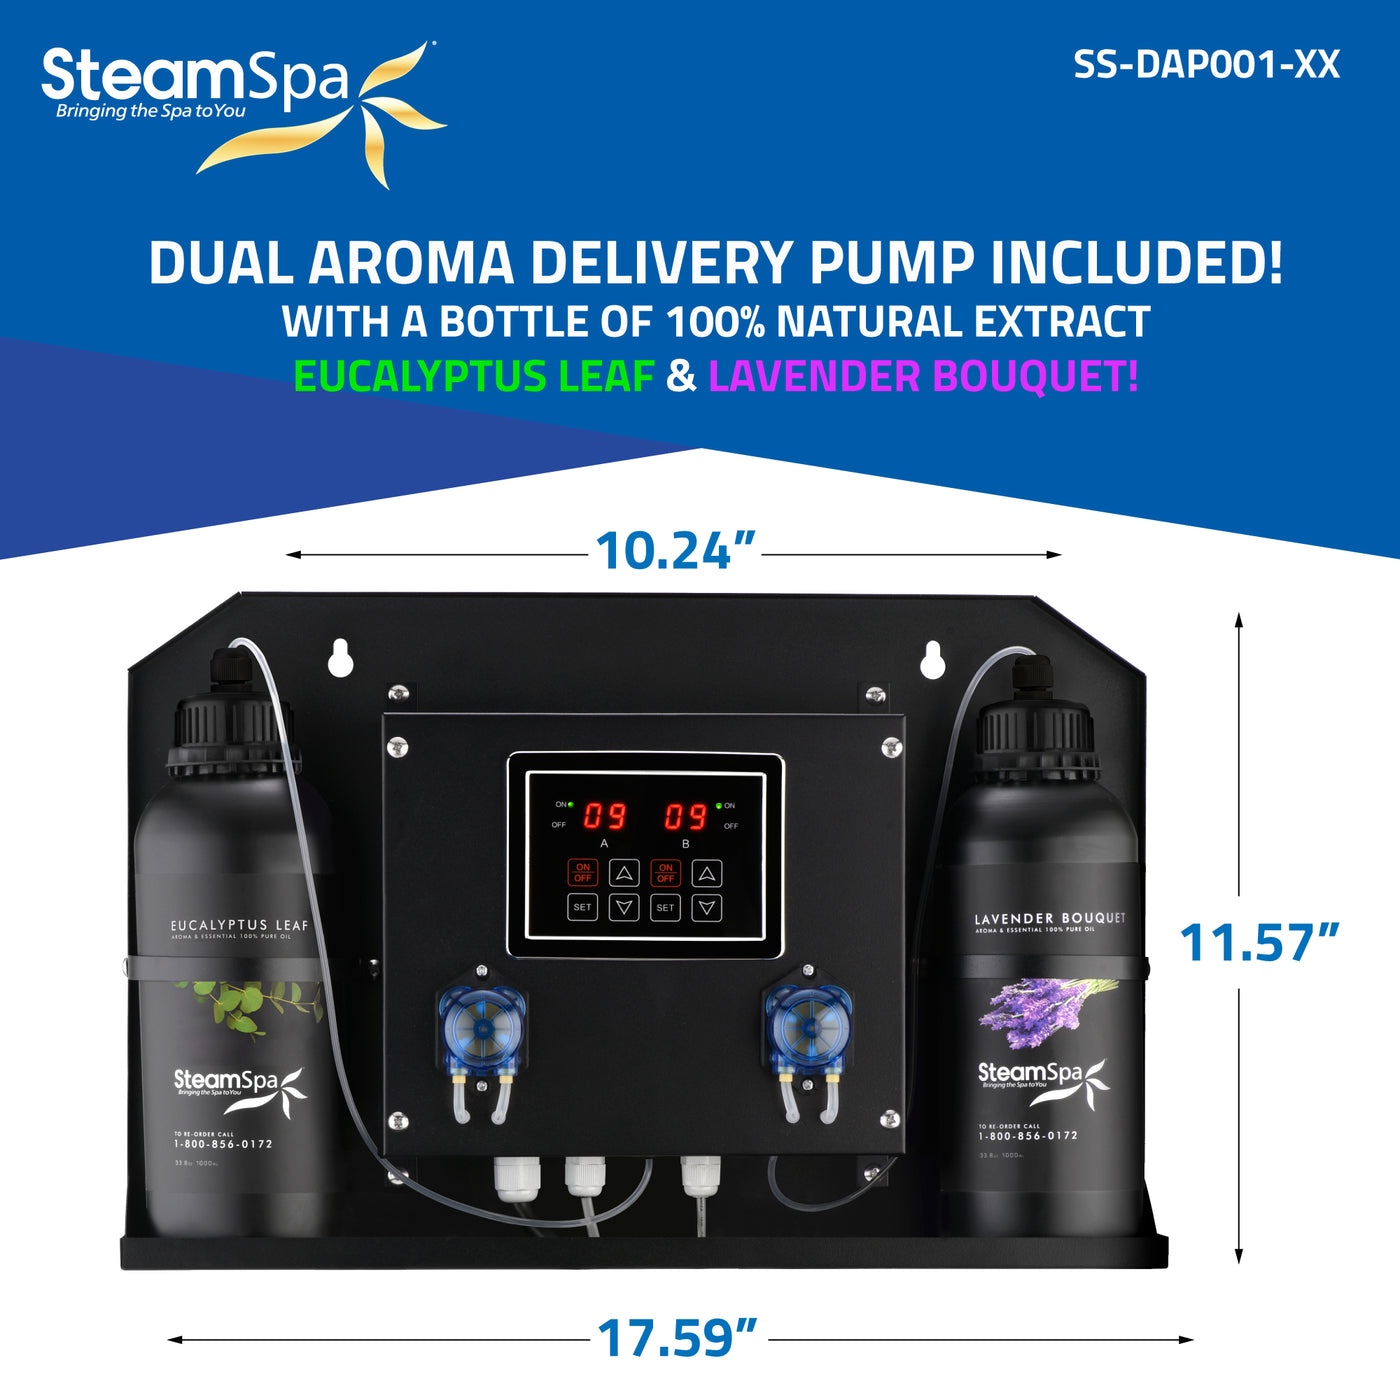 Black Series WiFi and Bluetooth 2 x 9kW QuickStart Steam Bath Generator Package with Dual Aroma Pump in Gold BKT1800GD-ADP